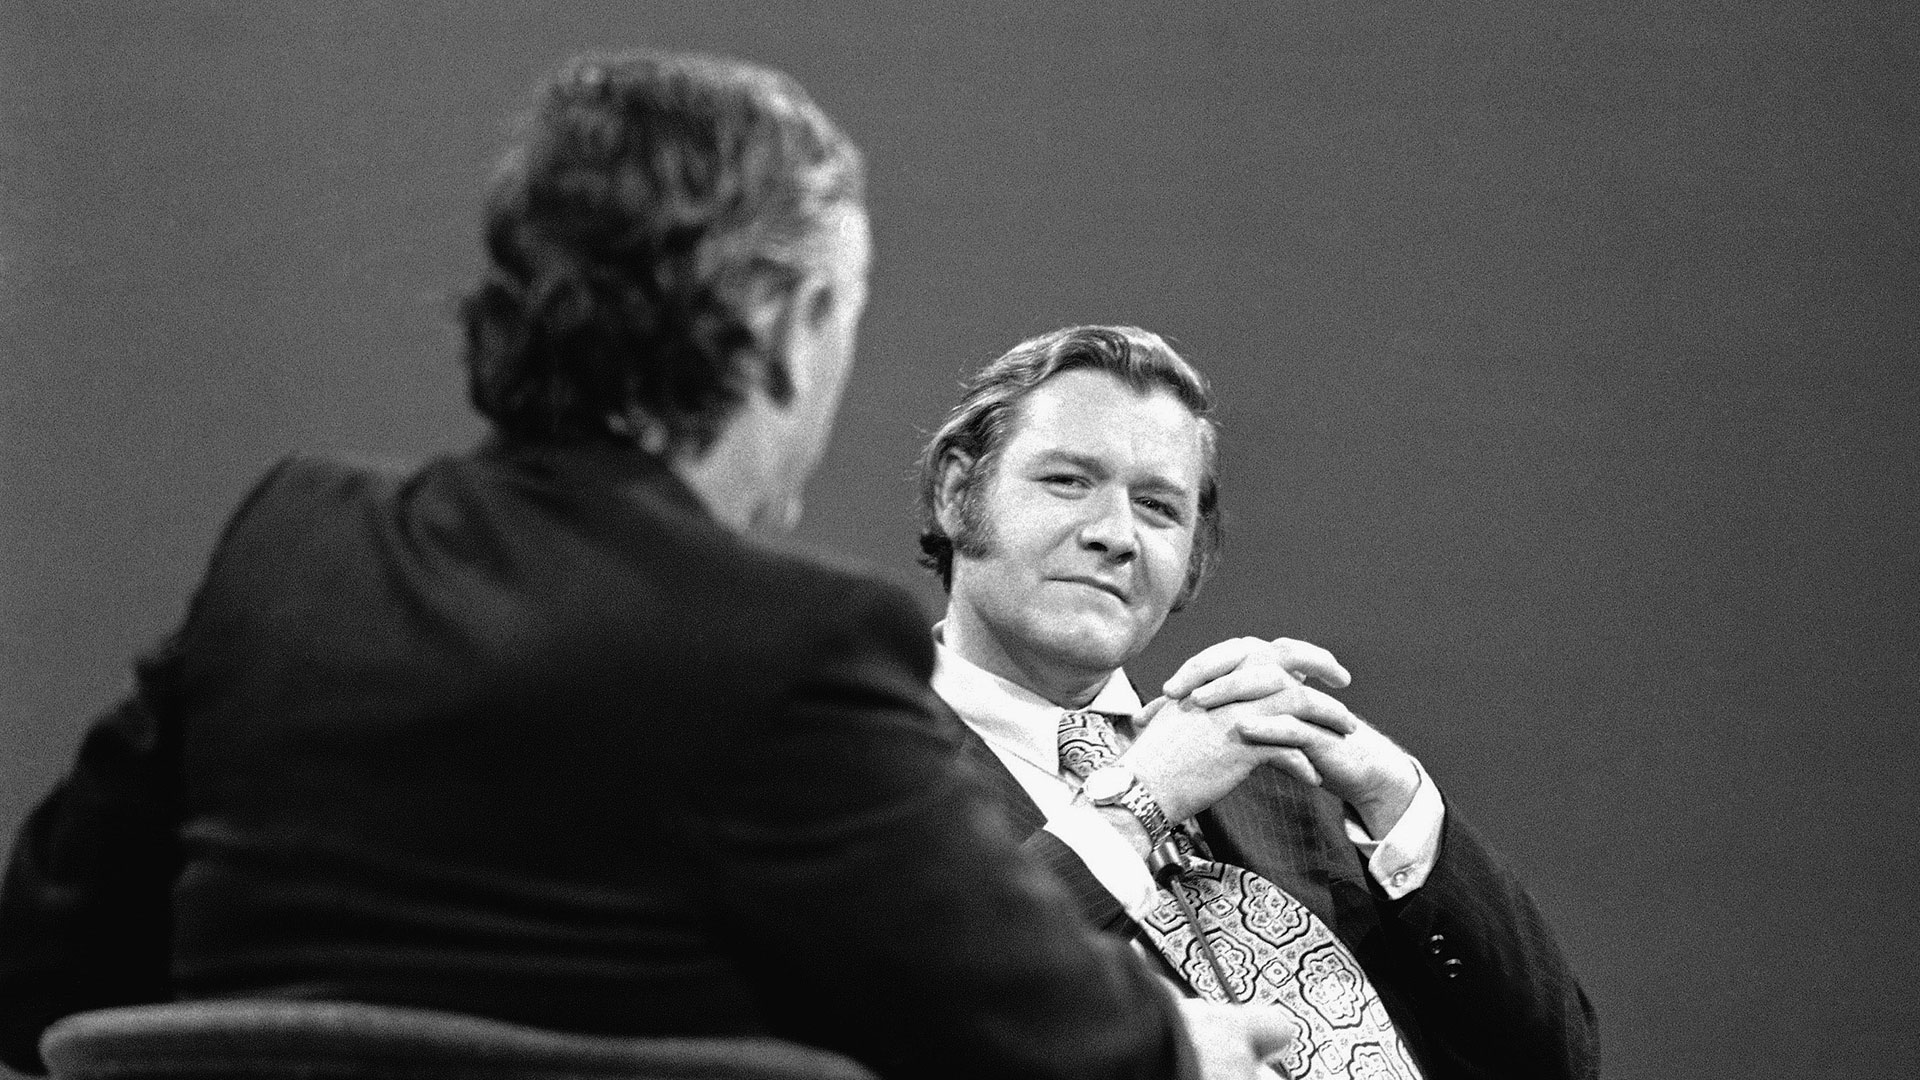 How Killer Edgar Smith Duped Many, Including William F. Buckley Jr., Into Believing He Was Innocent